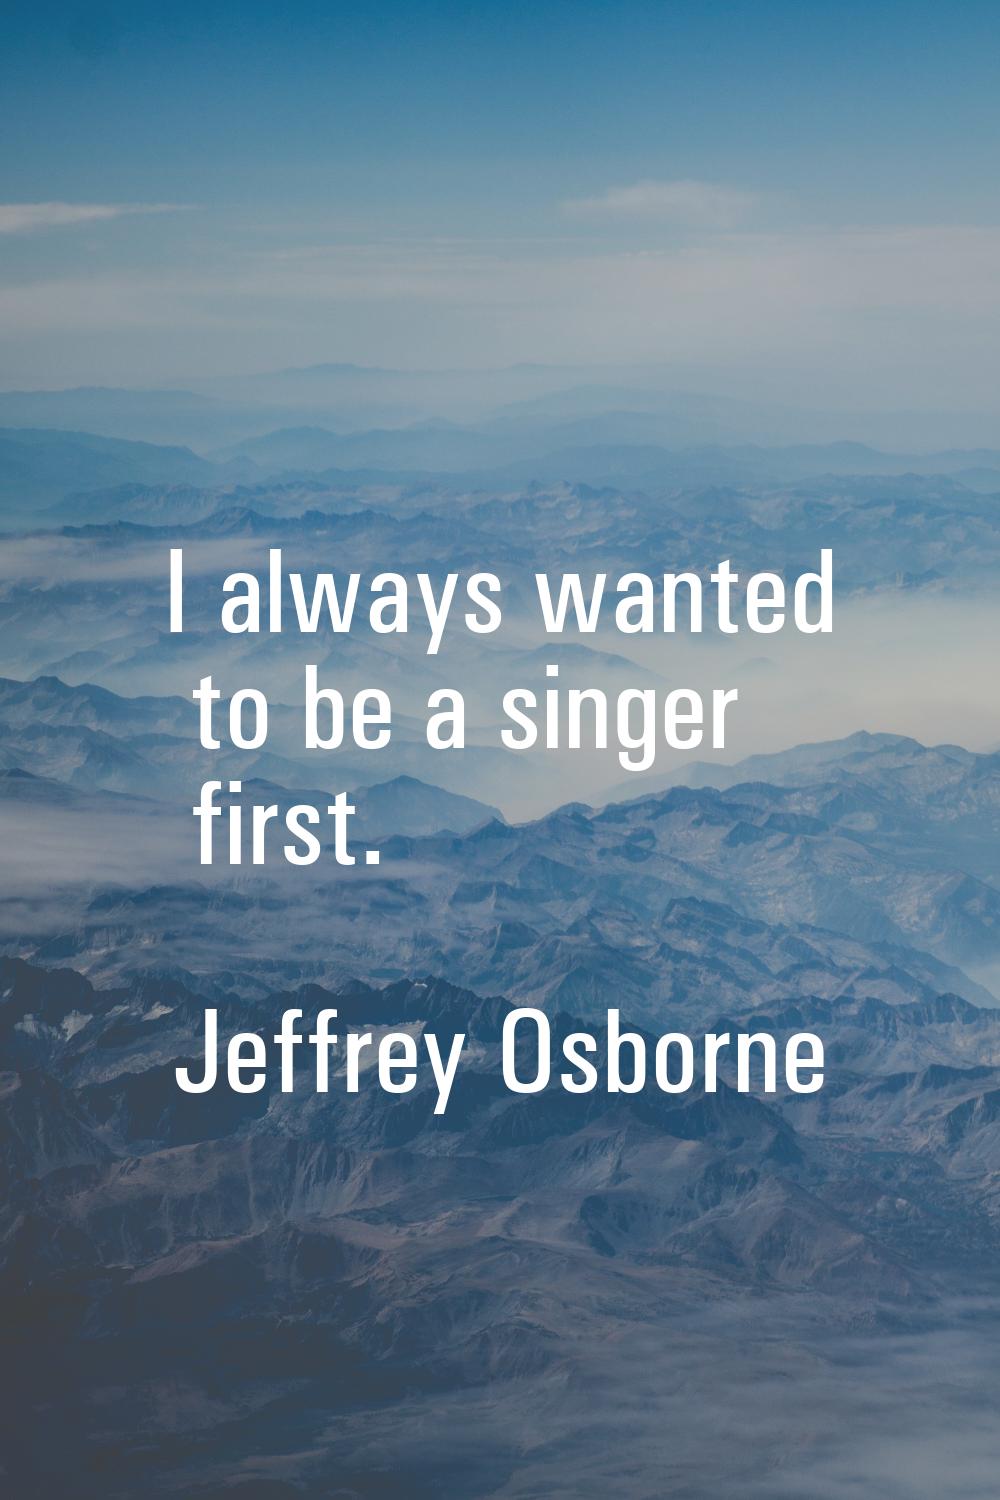 I always wanted to be a singer first.